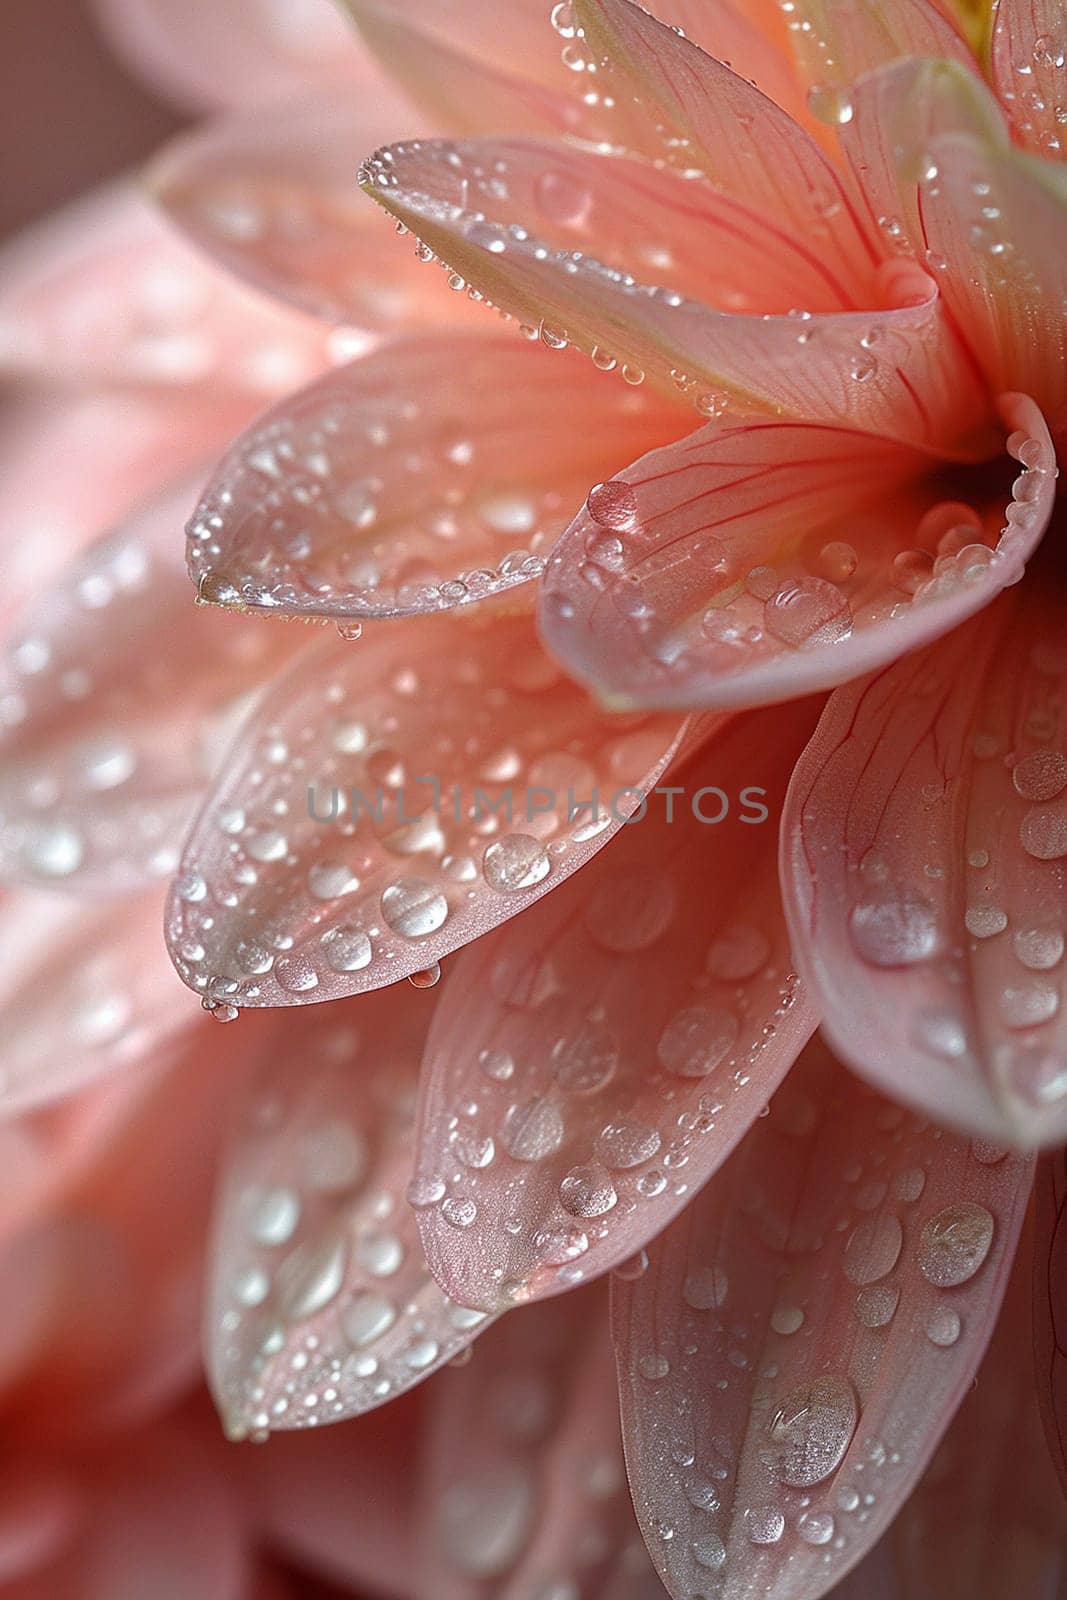 Delicate flower petals close-up with dew, for beauty and nature-inspired projects.